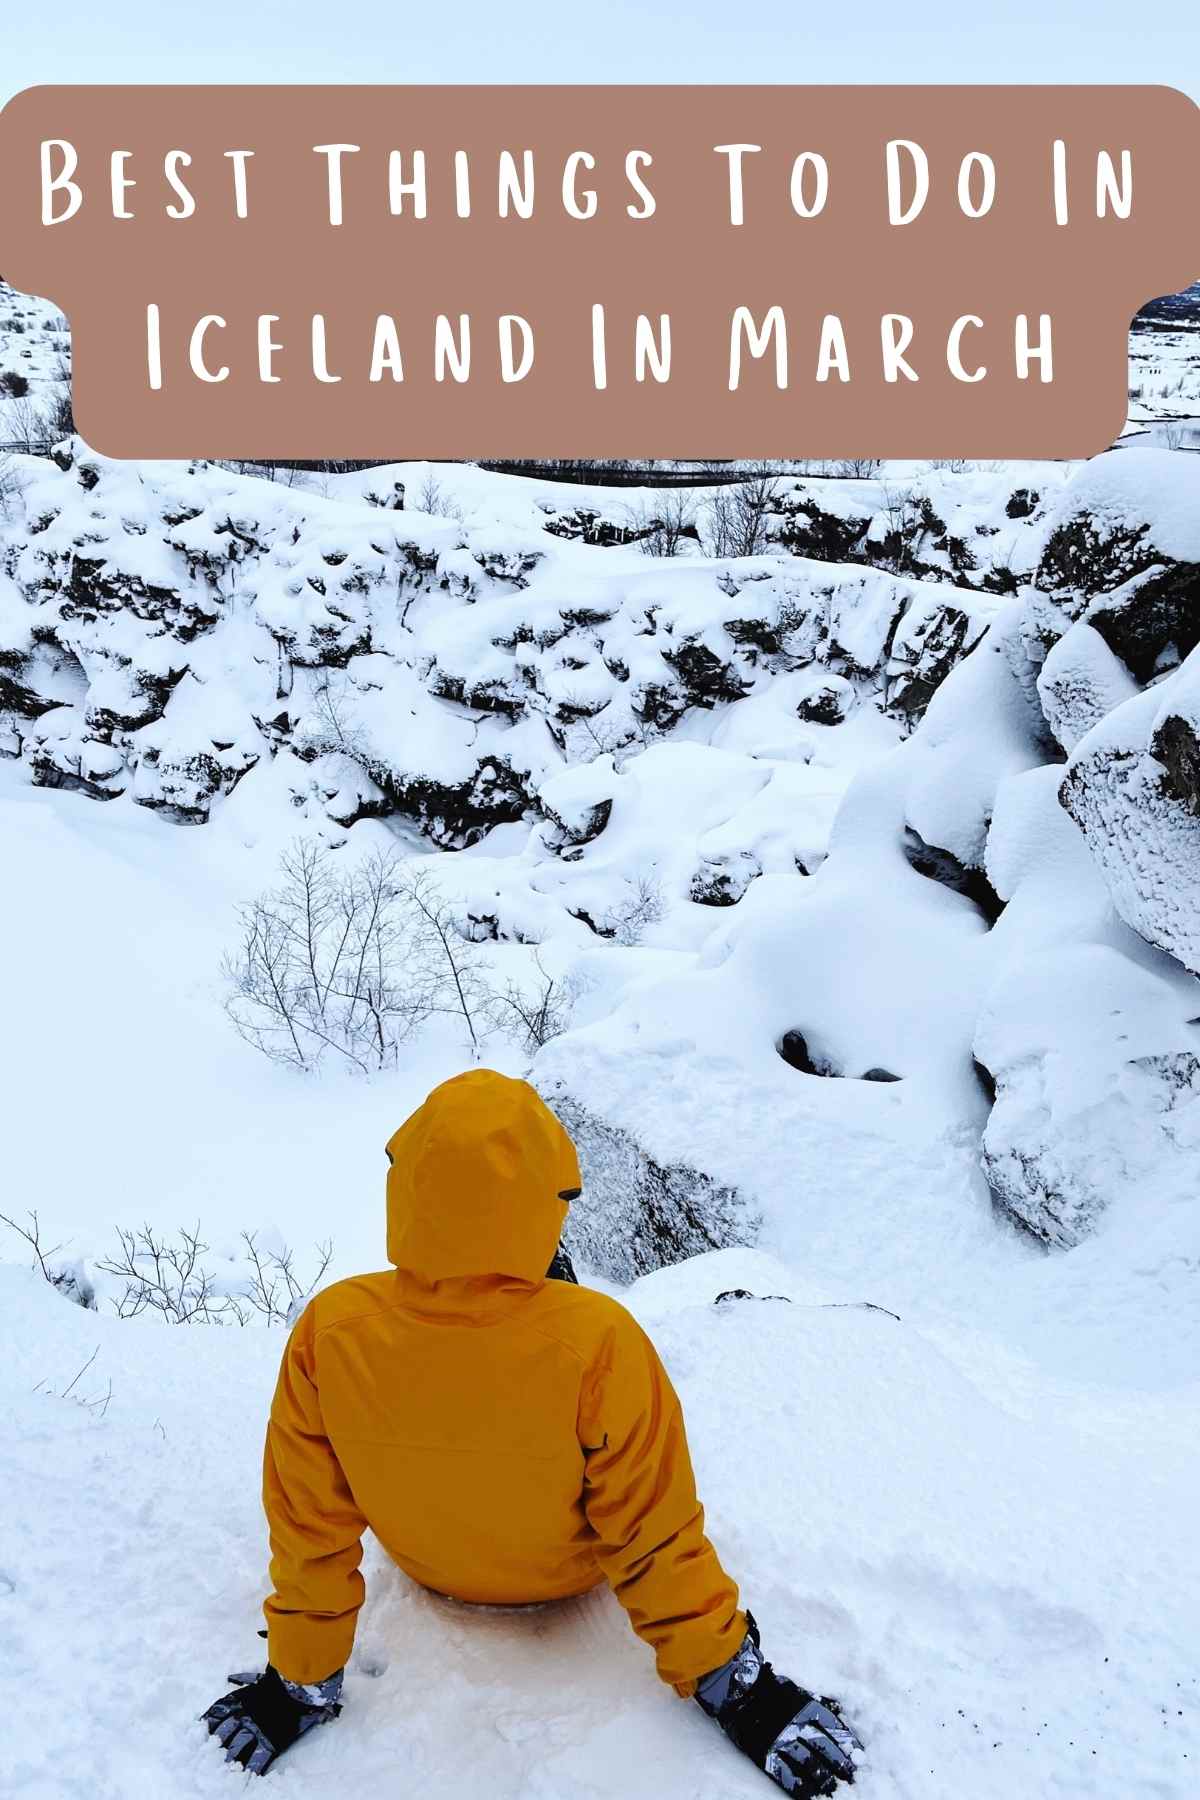 Best Things To Do In Iceland In March